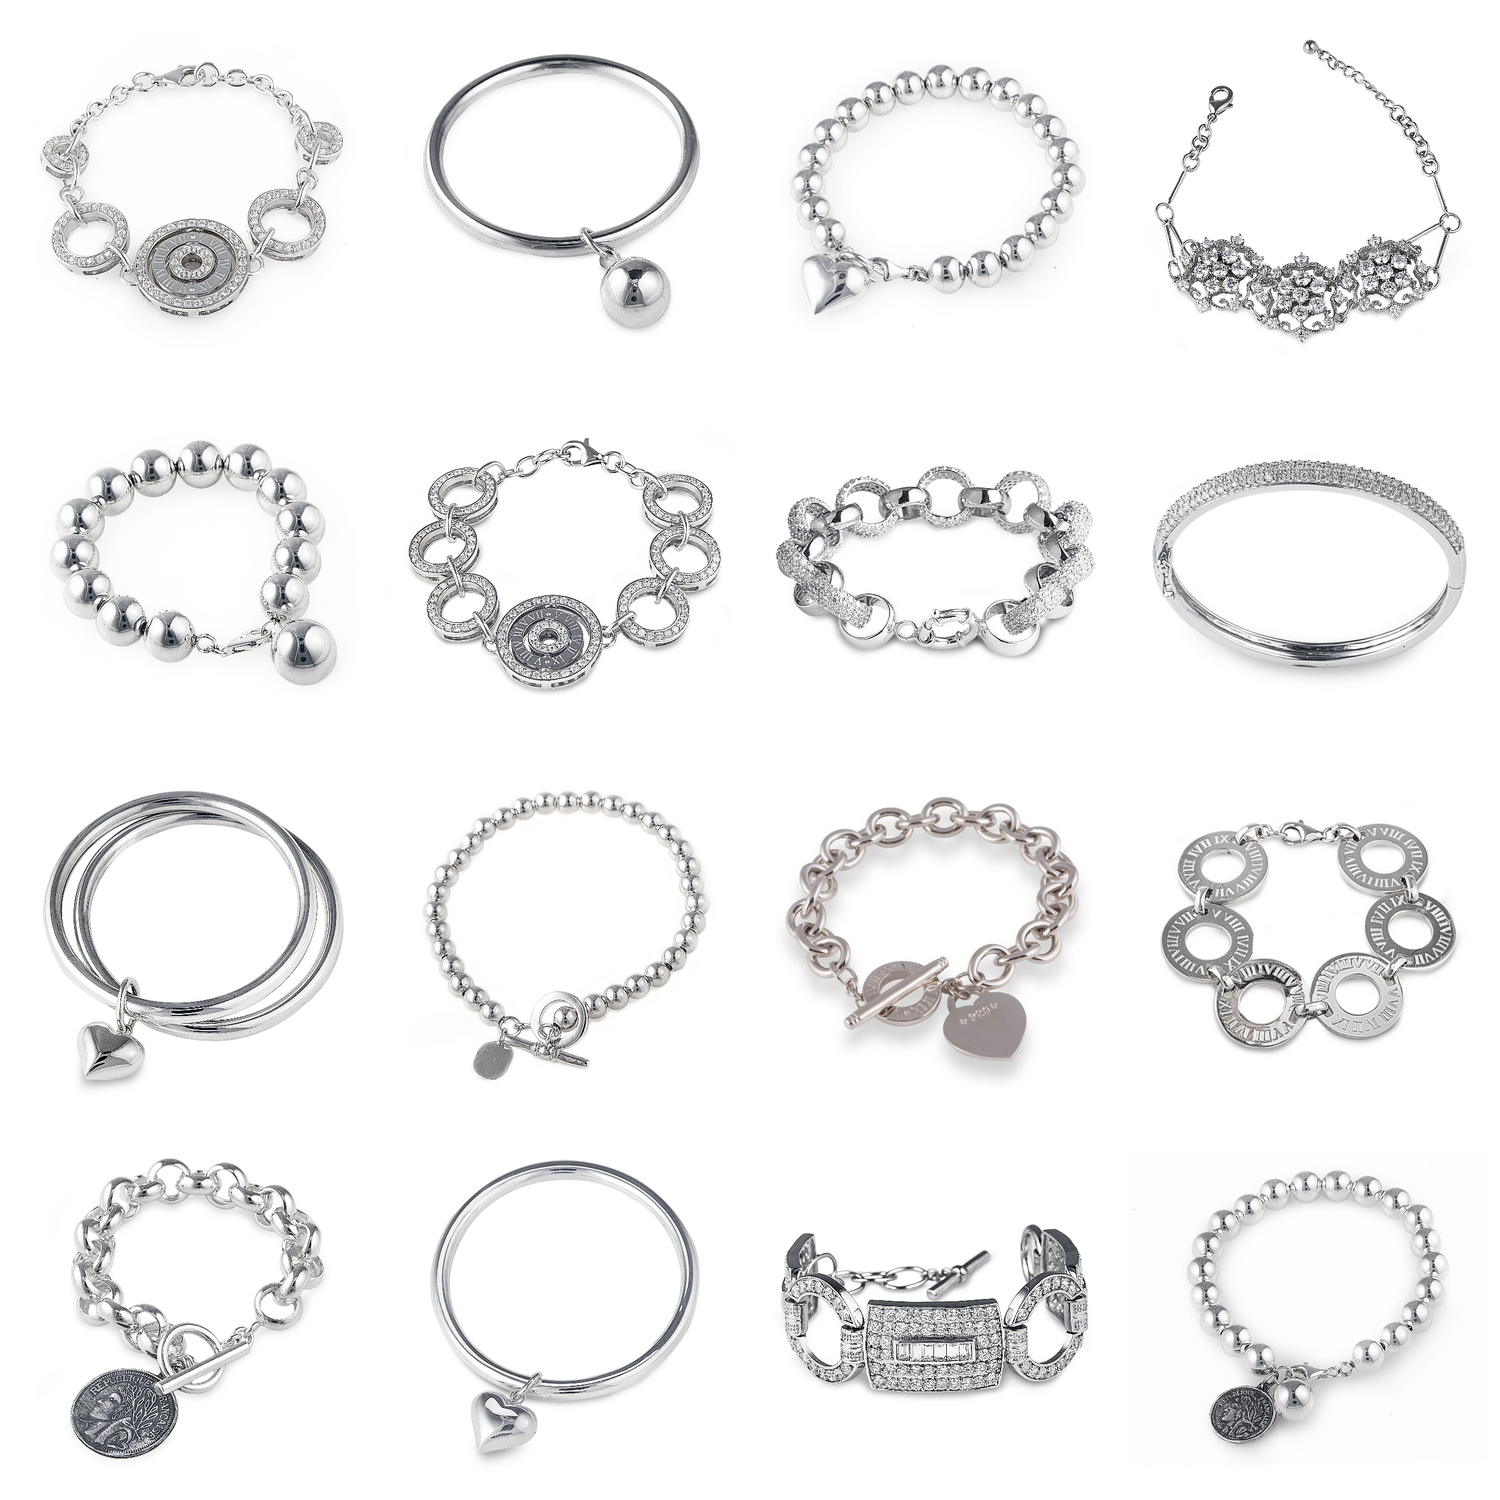 925 Sterling Silver Bracelets with Cubic Zirconia Stones by Bellagio & Co. Worldwide Shipping from Australia.